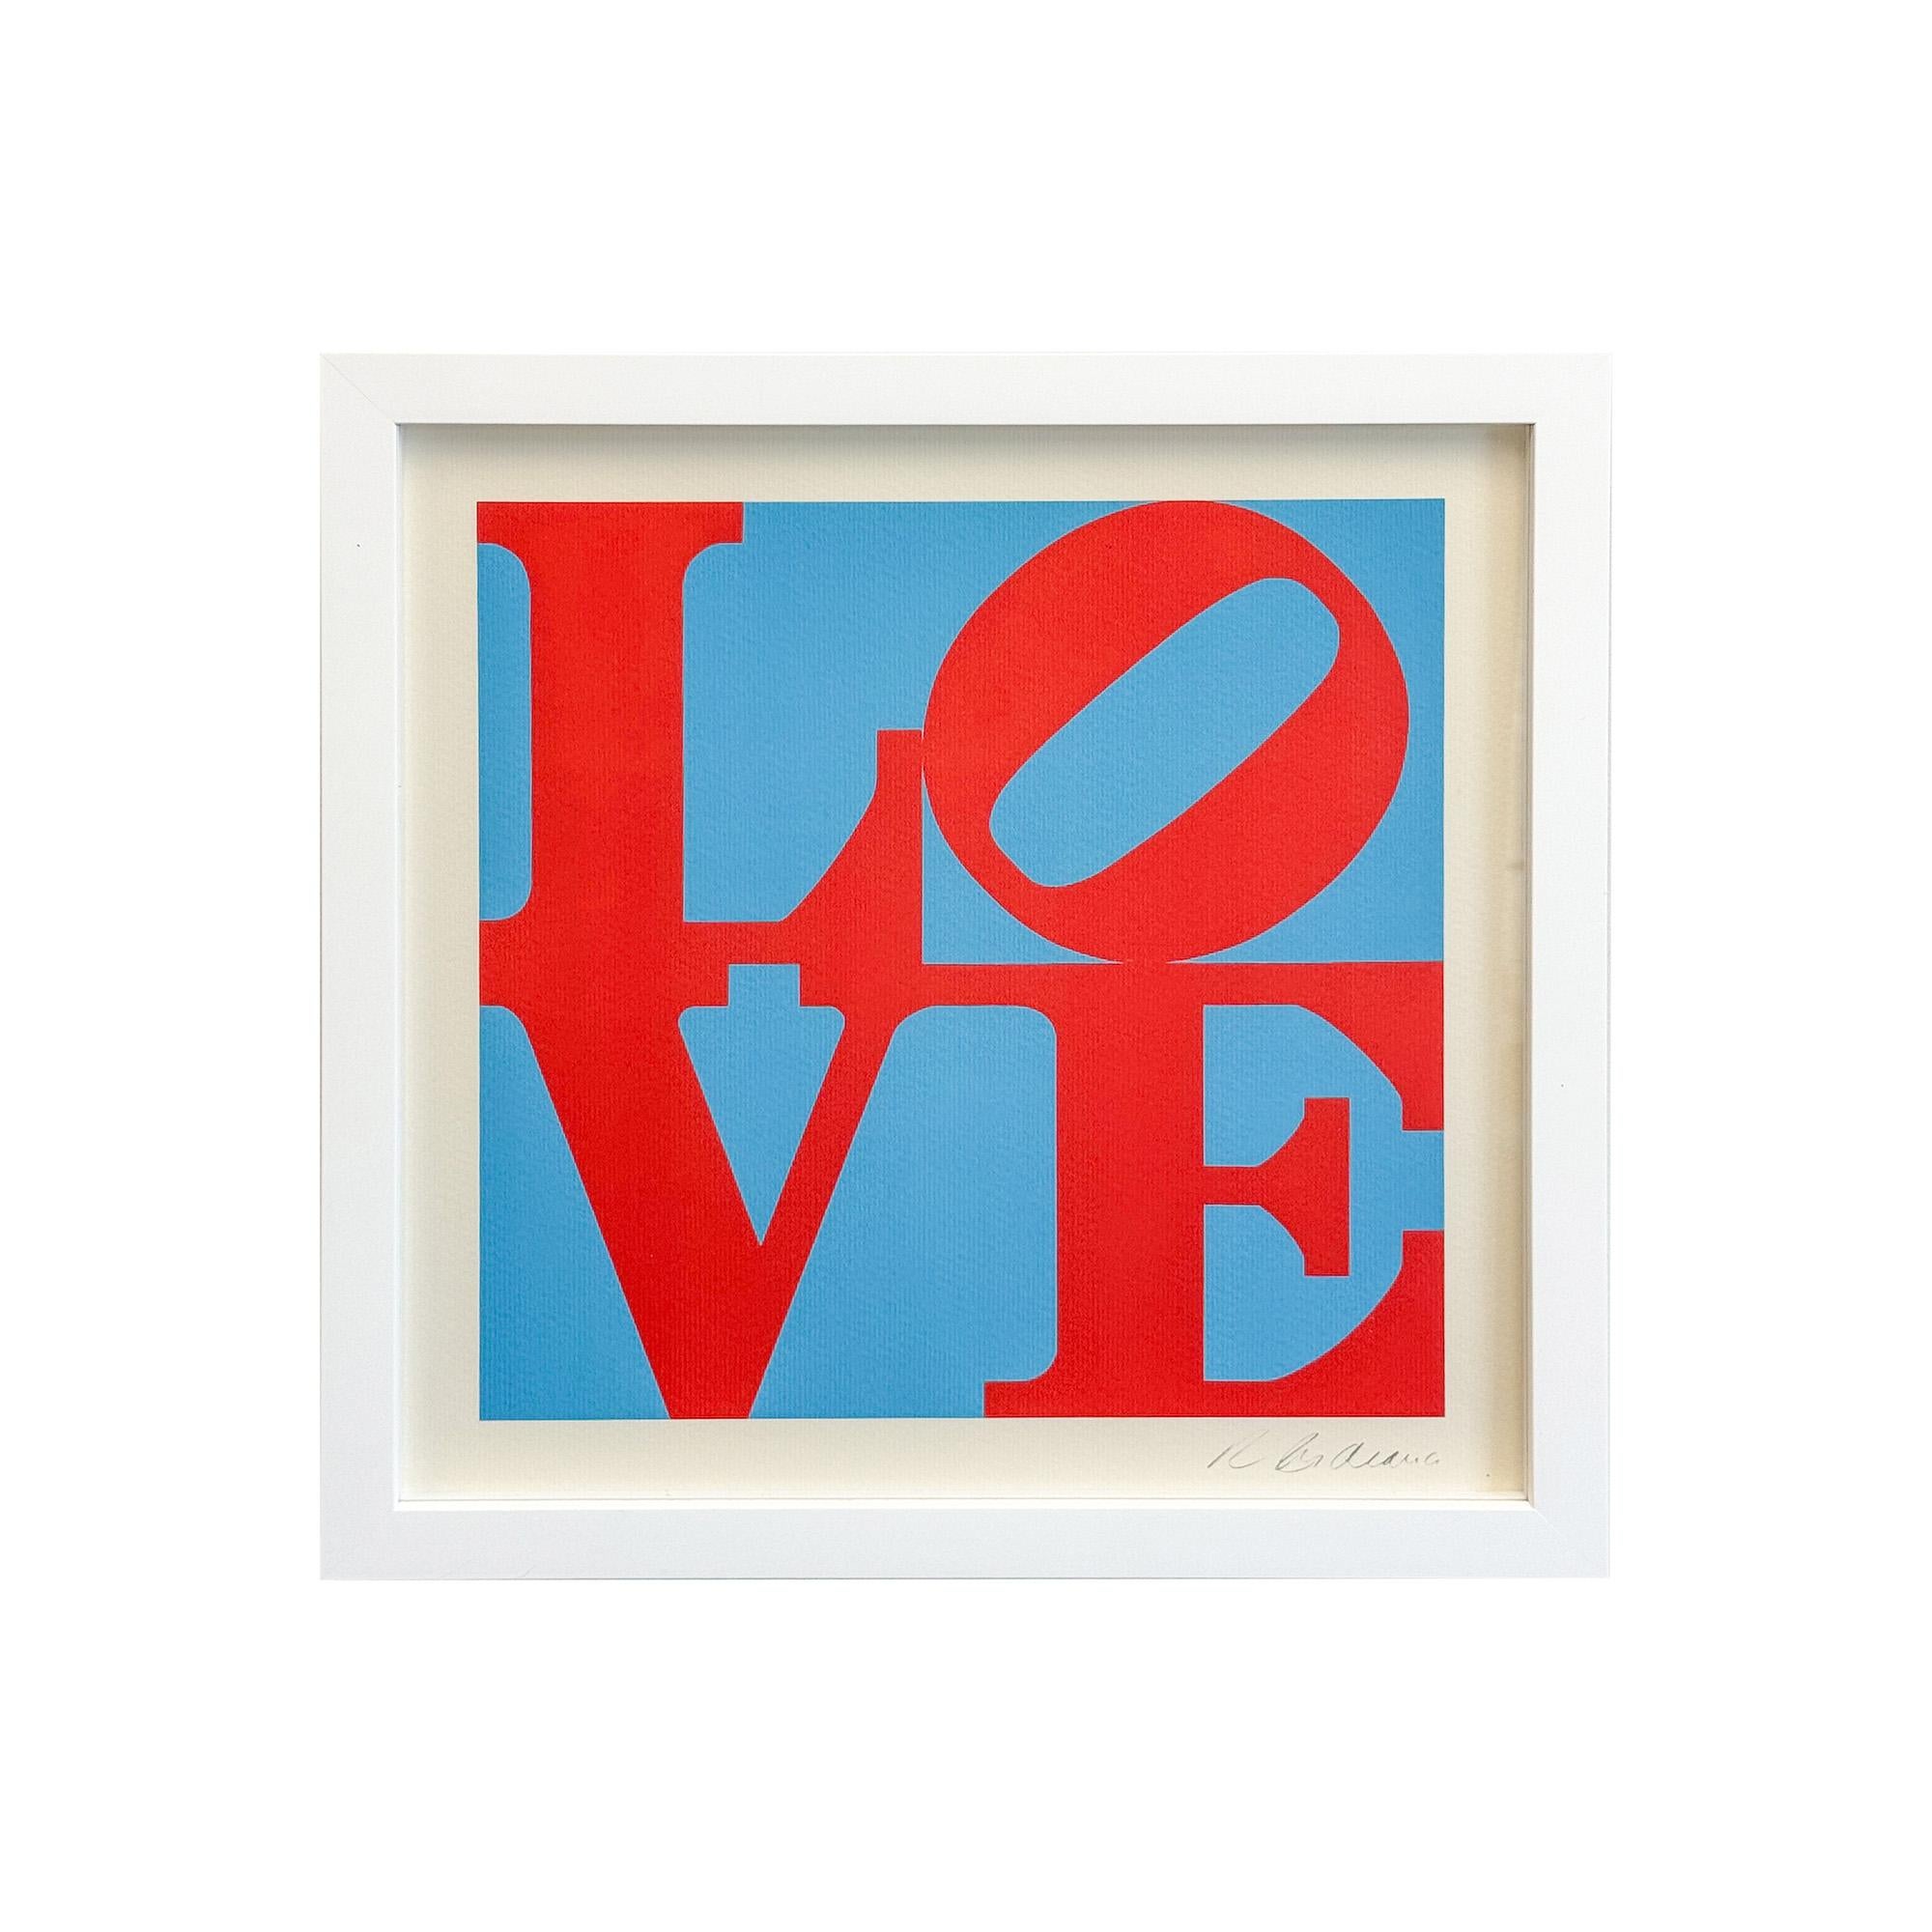 A limited edition lithograph by Pop Art artist Robert Indiana ( American 1928 - 2018)  of his iconic Philidalphia Love in Red and Blue numbered 87/225. The lithograph was printed by the Guggenheim Museum in 225 hand-numbered copies in year 2000. The